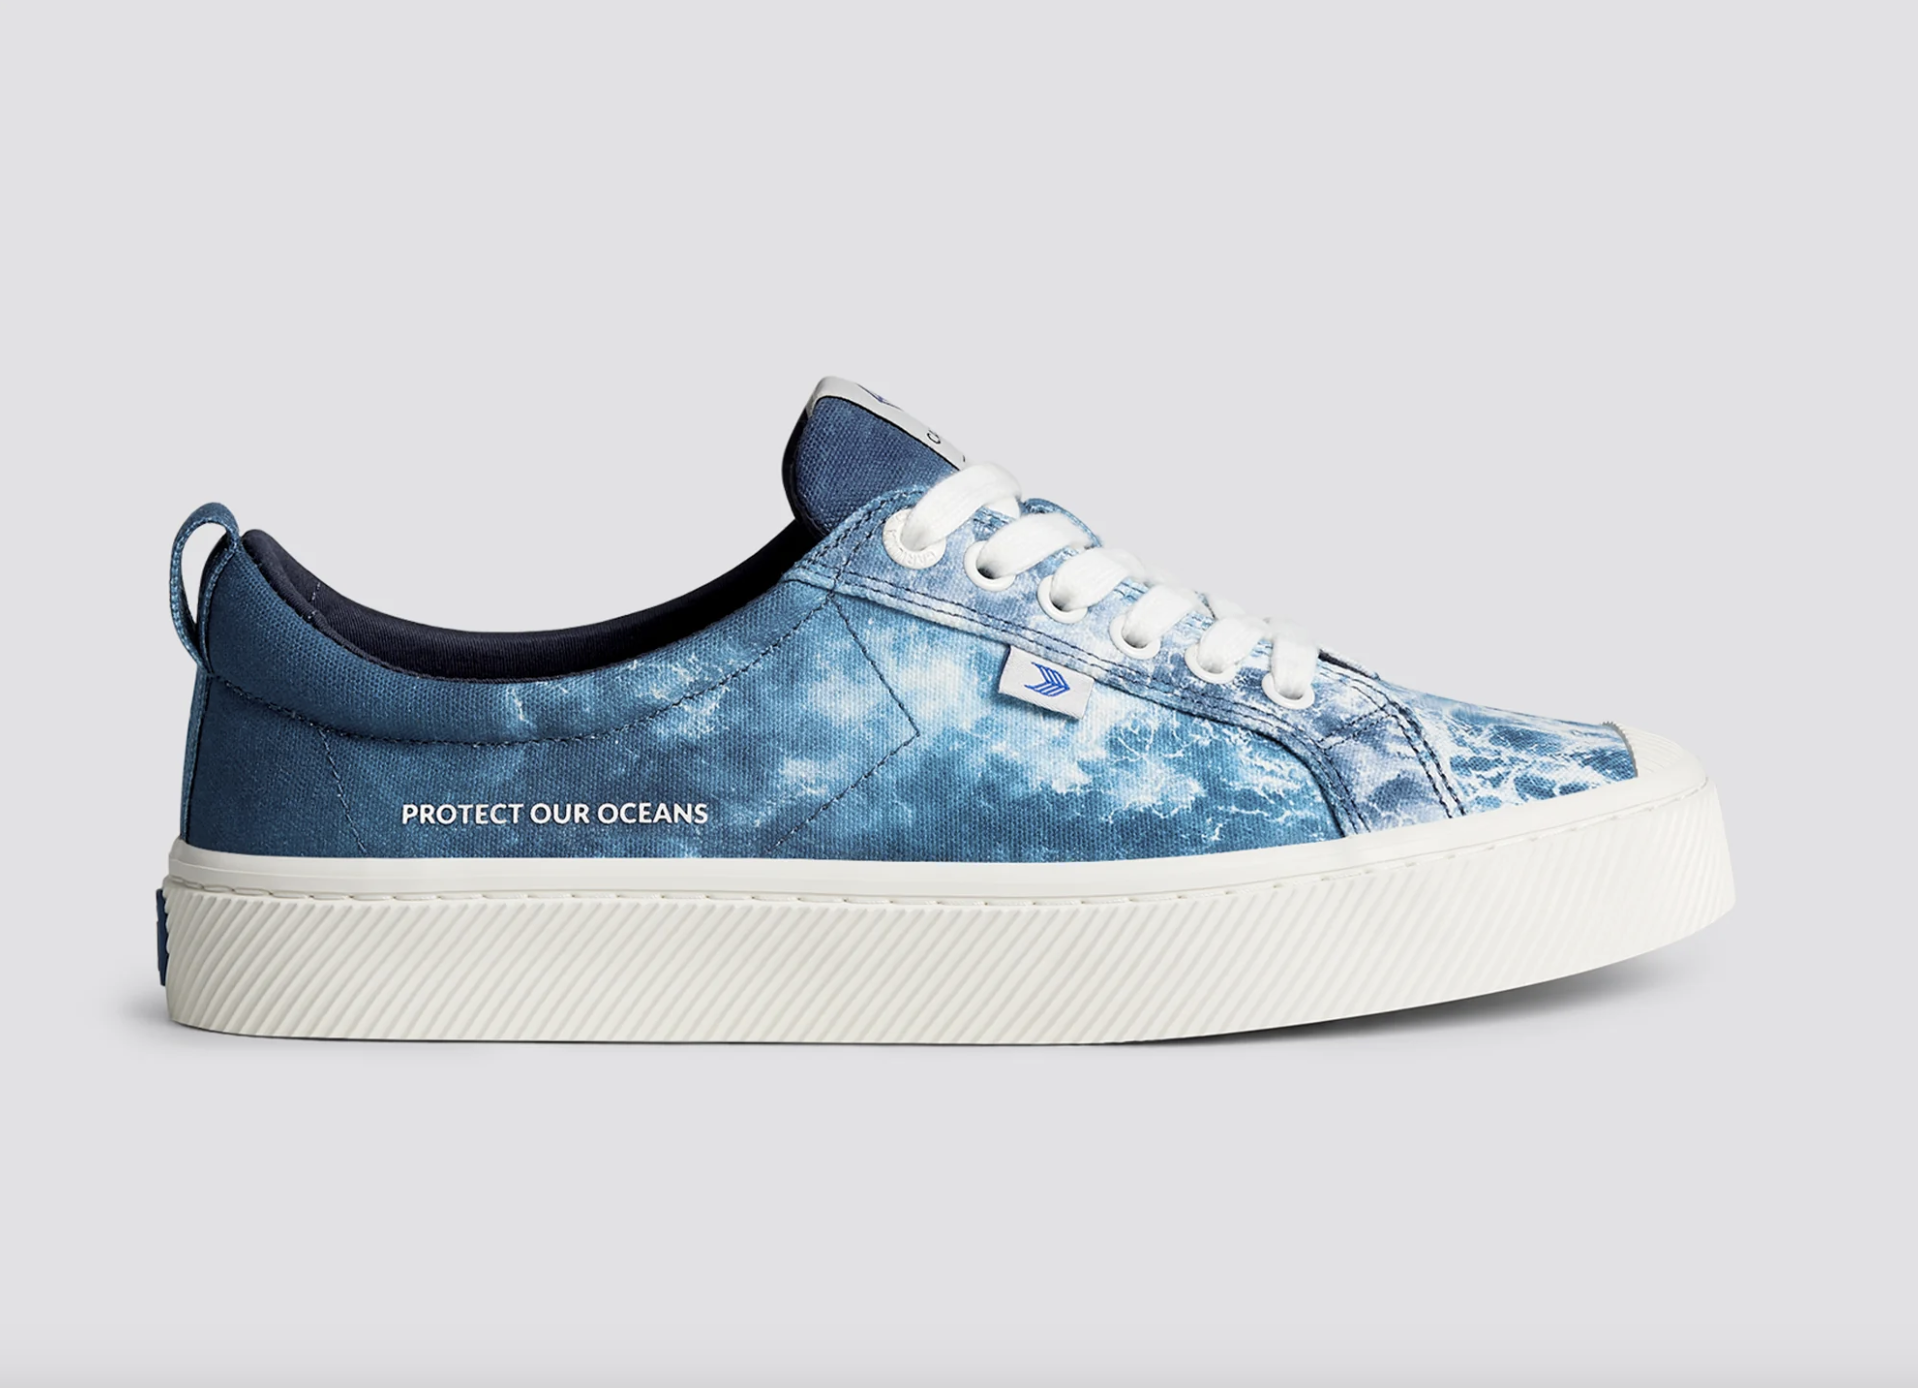 Cariuma's Newest Sneakers Help Save the Oceans | Well+Good